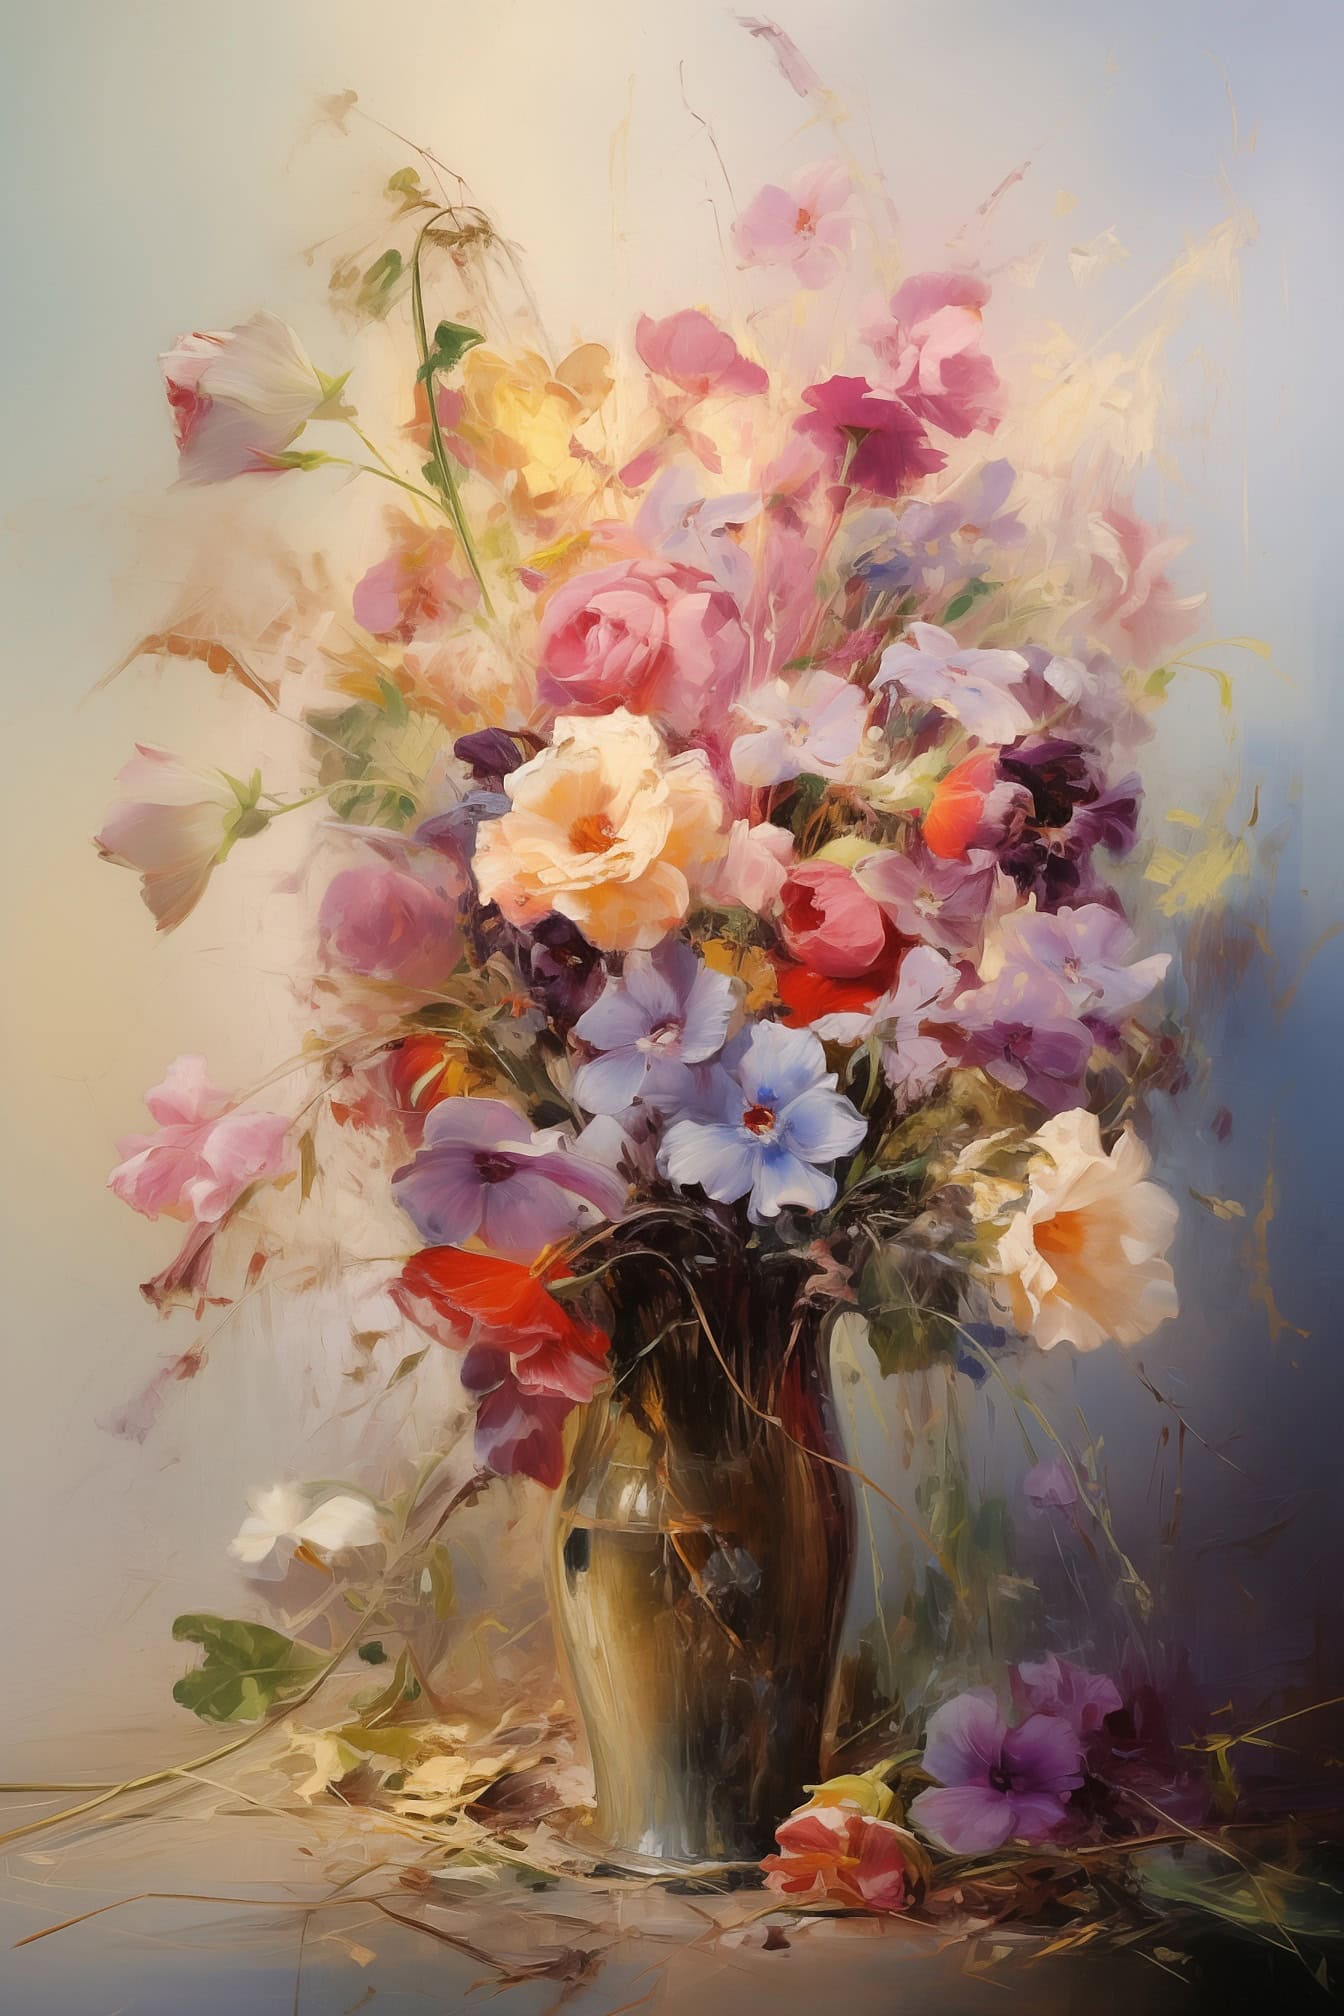 Oil painting in pastel colors of bouquet of flowers in a vase with fallen flowers on the floor and with a blurred background